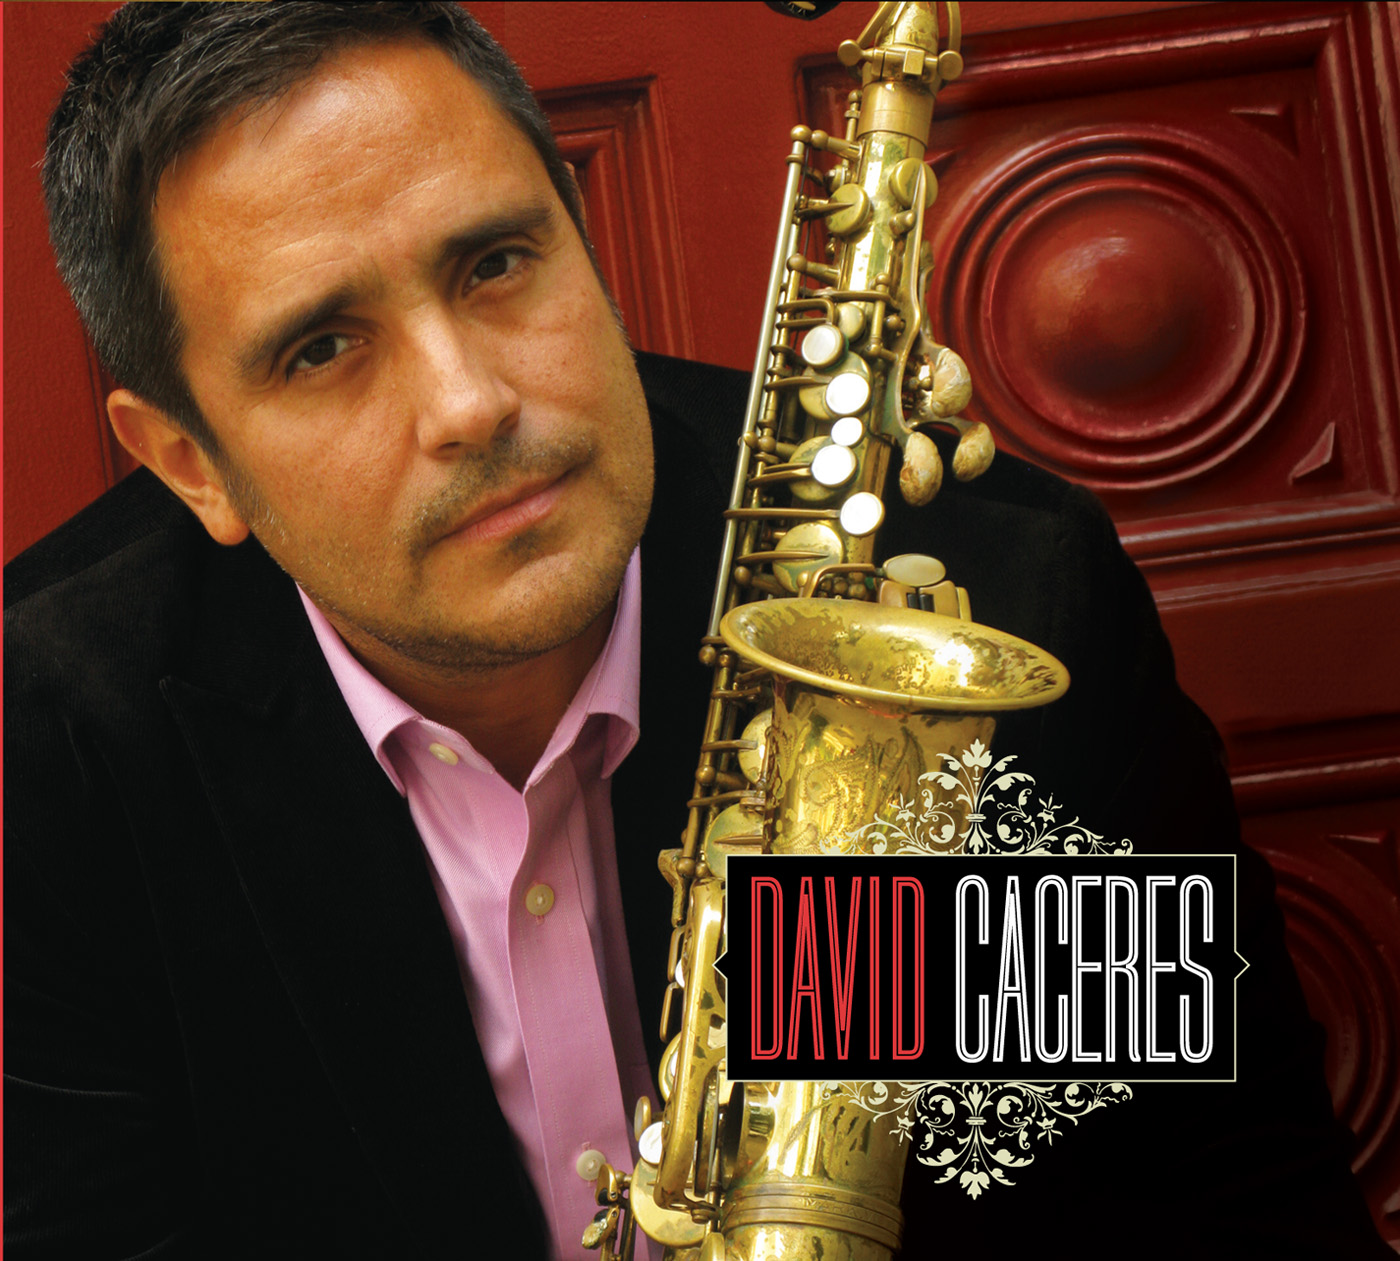 David Caceres CD Release Event